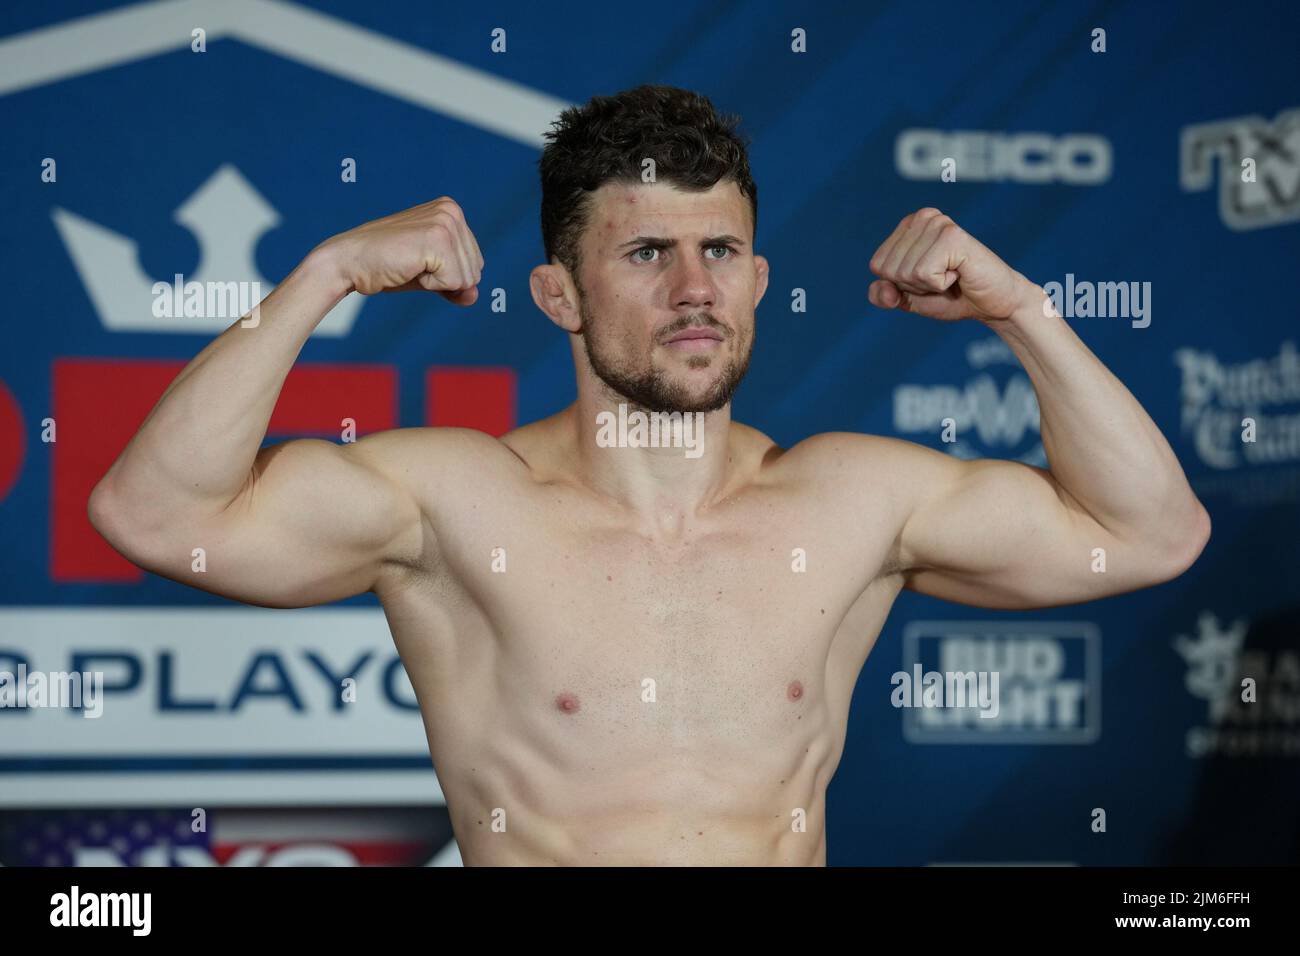 NEW YORK CITY, NY - August 4: Natan Schulte steps on the scale for the official weigh-ins at The New Yorker Hotel for 2022 PFL Playoffs Semi-Finals : Official Weigh-ins on August 4, 2022 in New York City, NY, United States. (Photo by Louis Grasse/PxImages) Stock Photo